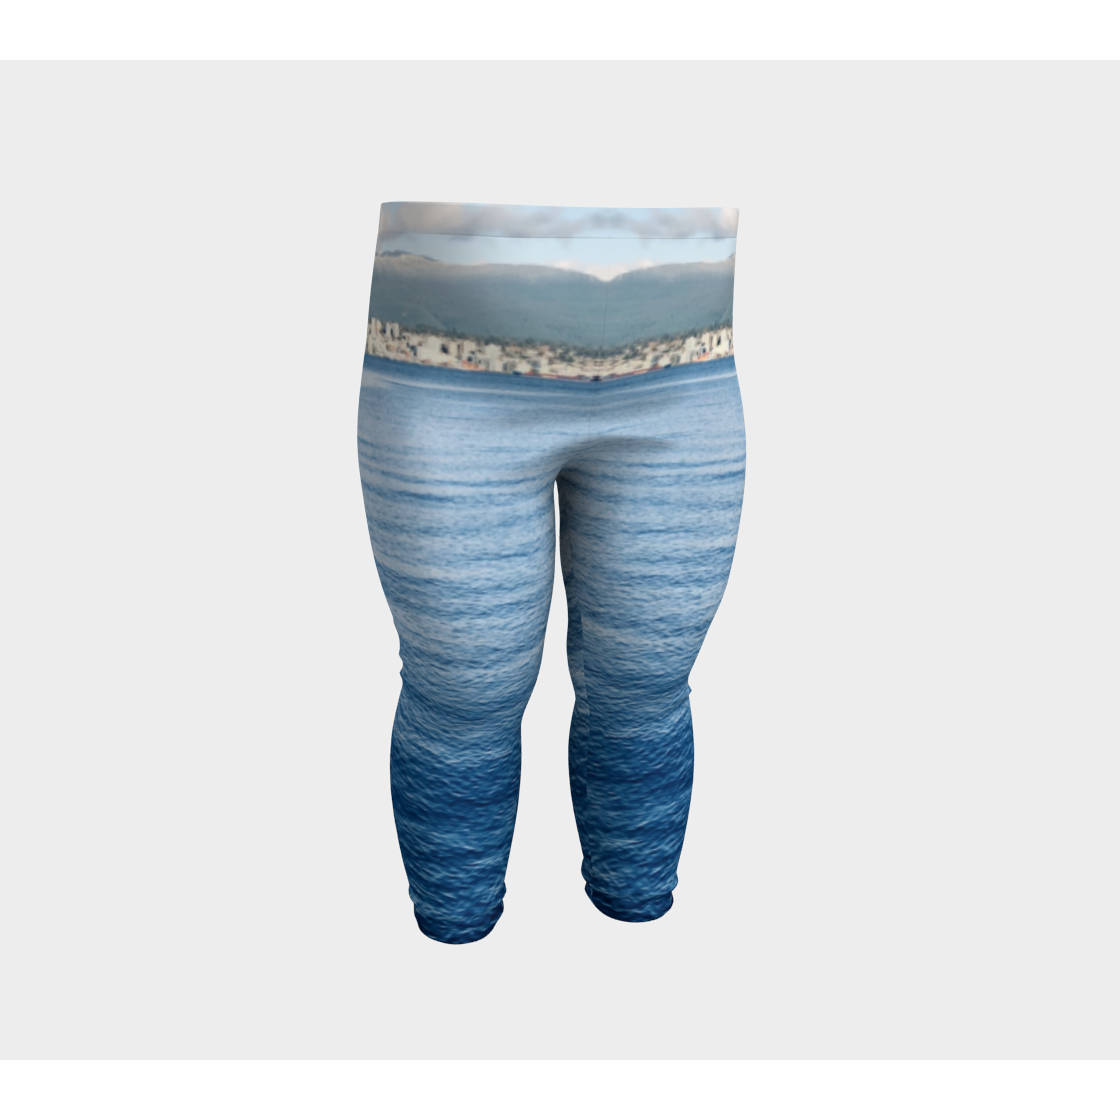 Baby Leggings for Children with: Ocean City Design, Front, 1 year